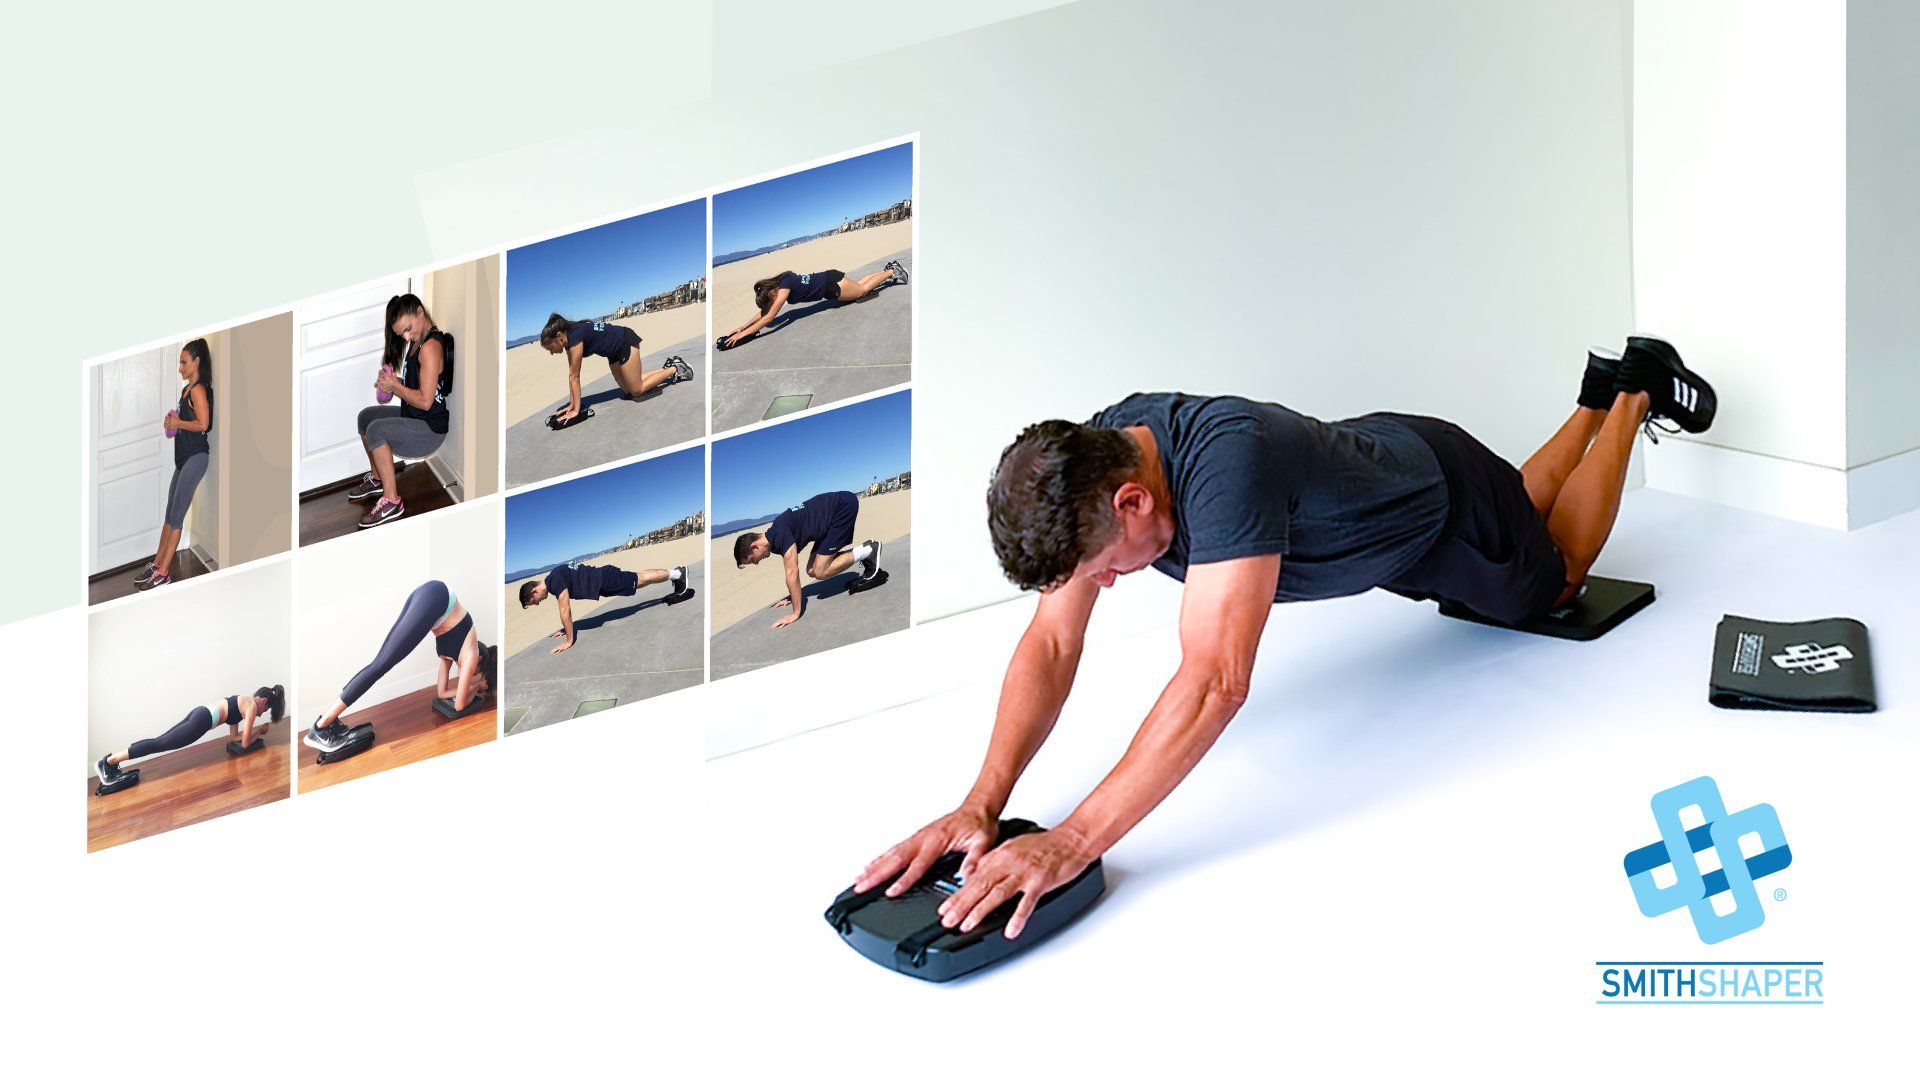 shows a man performing the SmithShaper Ab Roll exercise on a PRO ASR exerciser with his knees resting on a SmithShaper kneeling pad